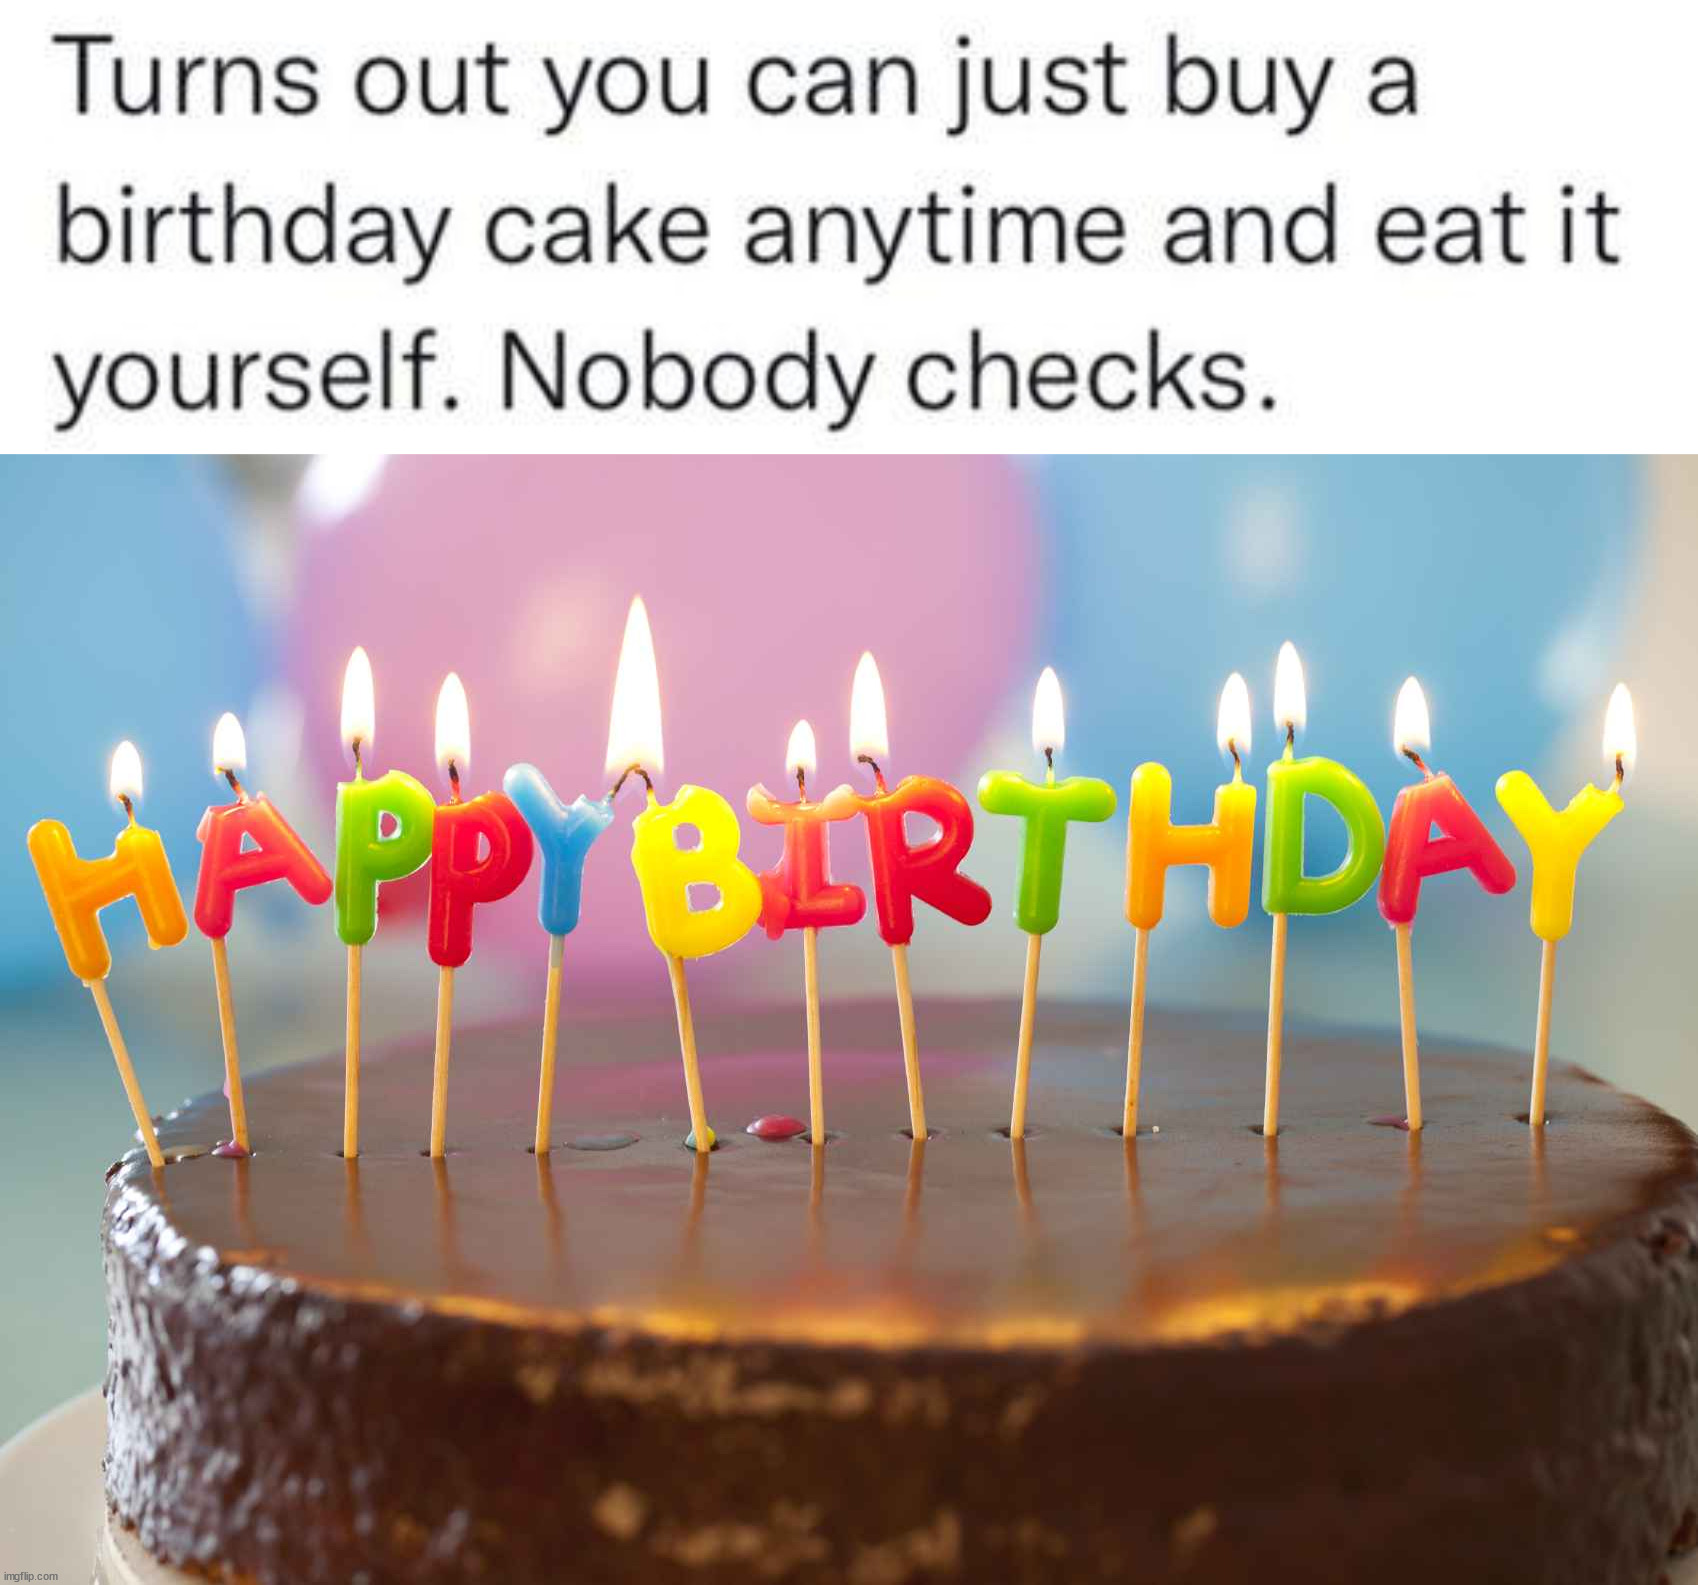 image tagged in birthday cake | made w/ Imgflip meme maker